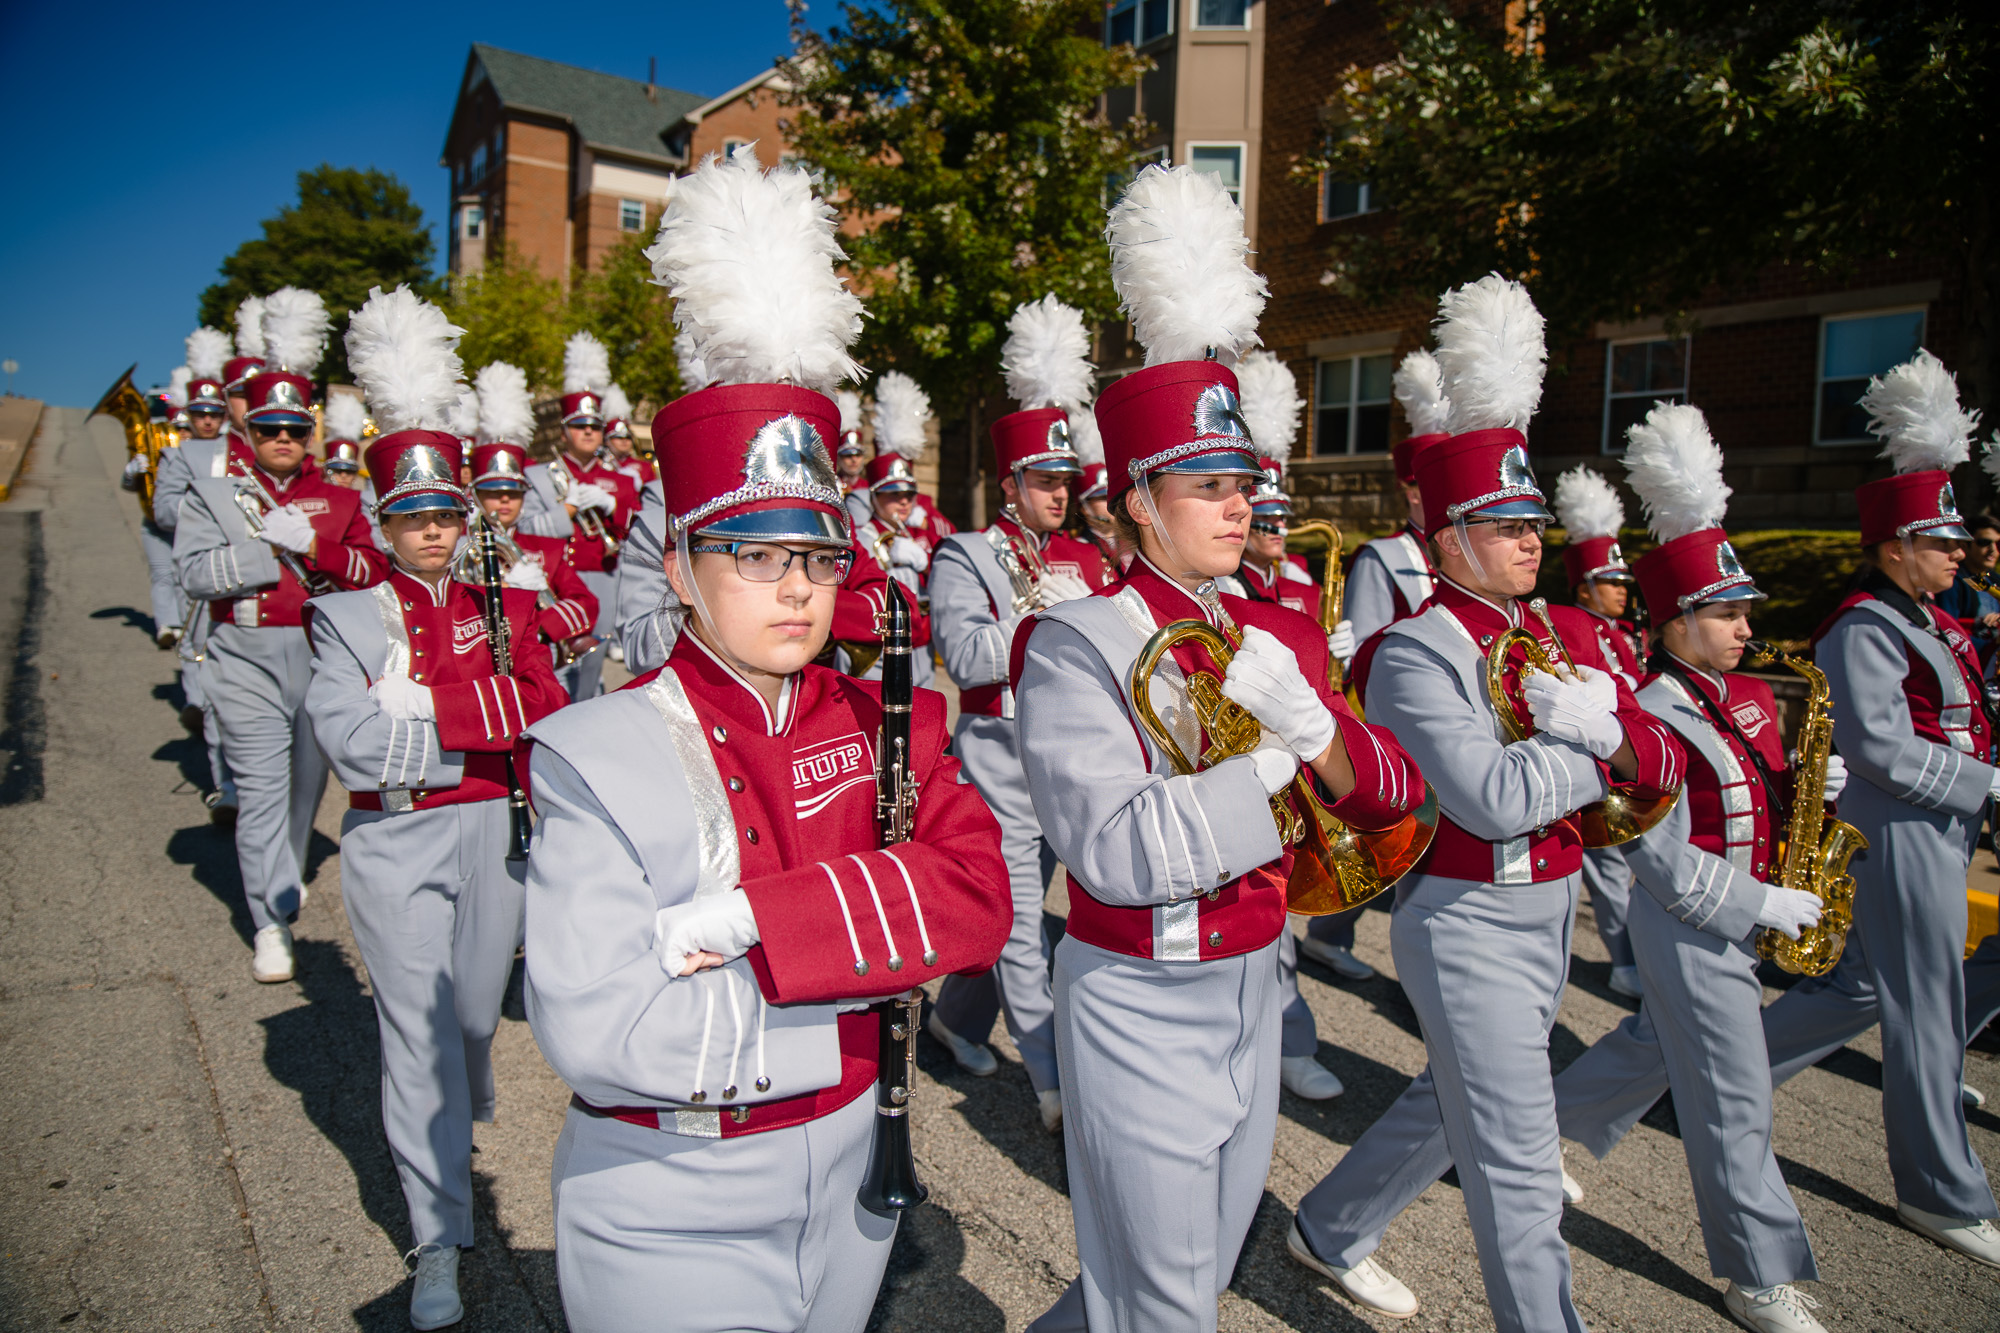 The IUP marching band marches toward the George P. Miller Stadium, where the IUP Crimson Hawks will take on California in the annual Coal Bowl.